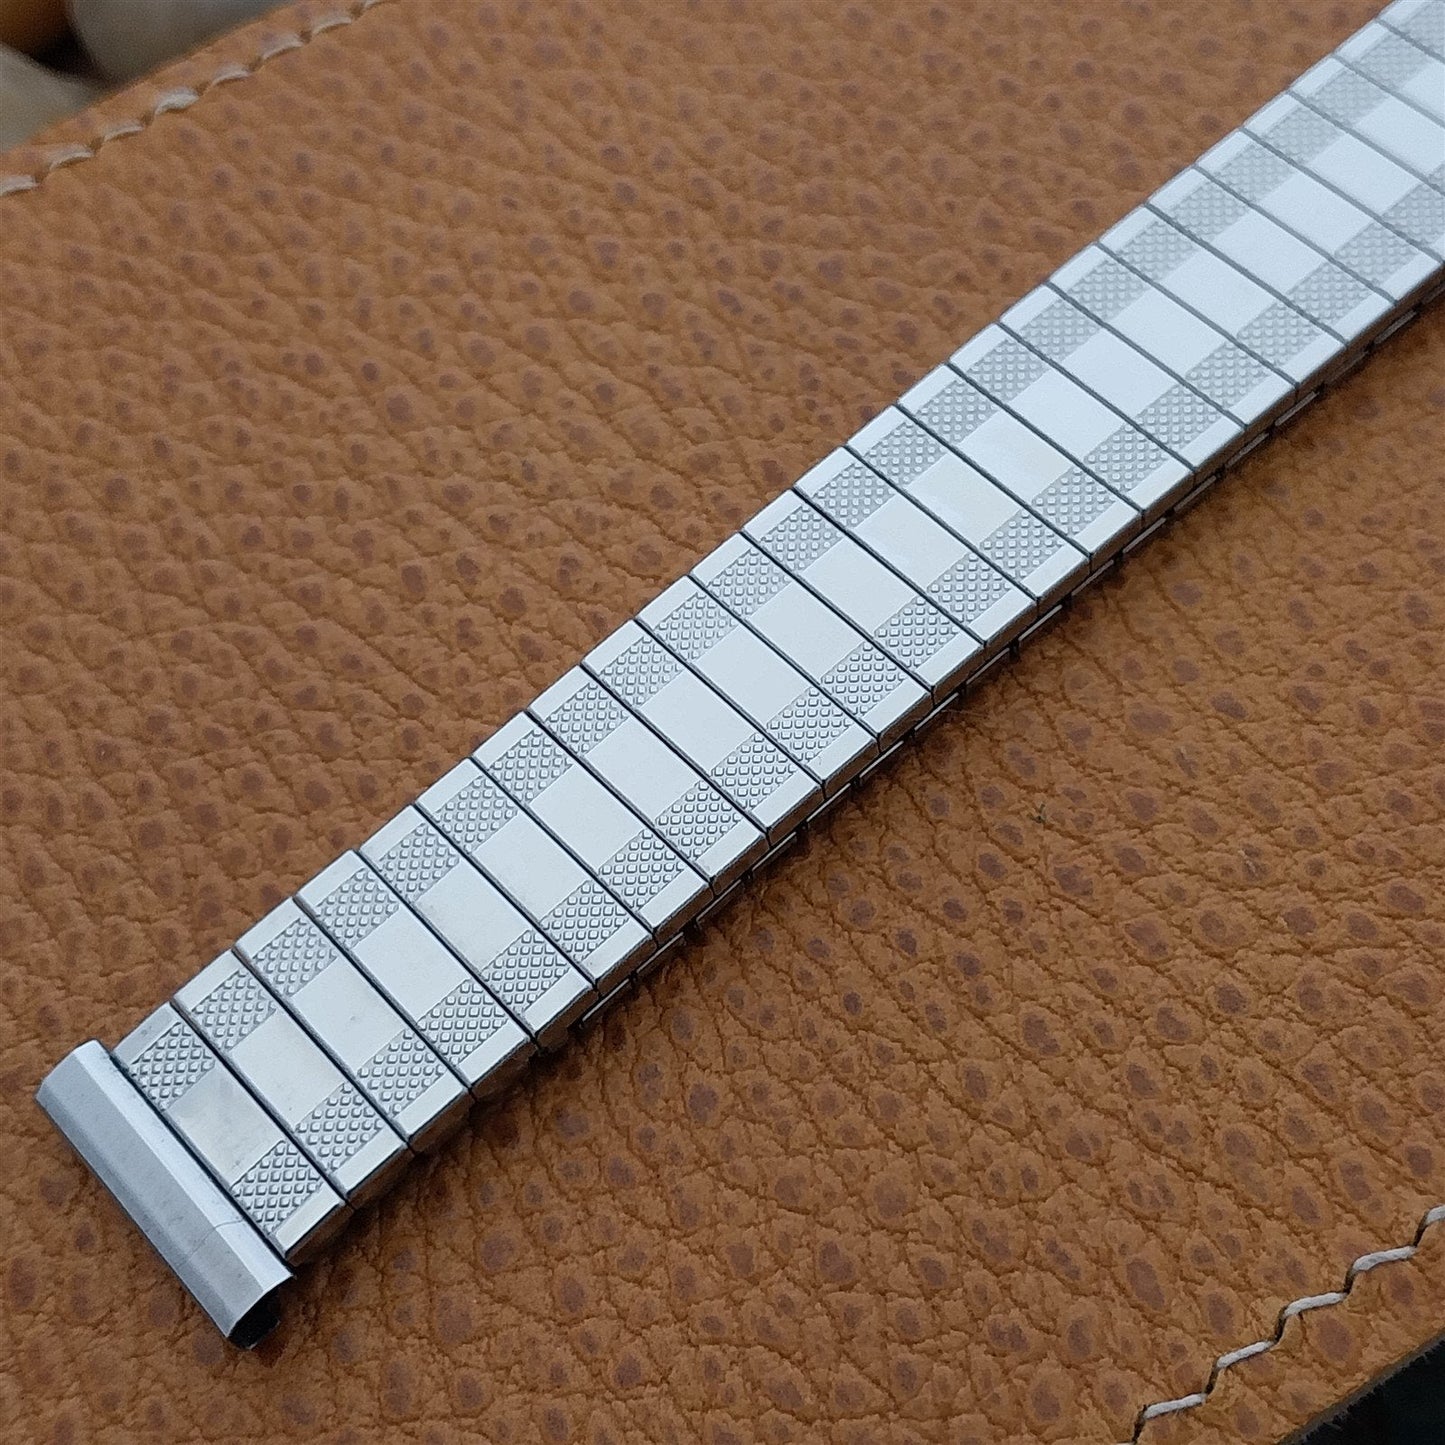 11/16" 17.2mm Flex-Let USA Stainless Steel Expansion nos 60s Vintage Watch Band